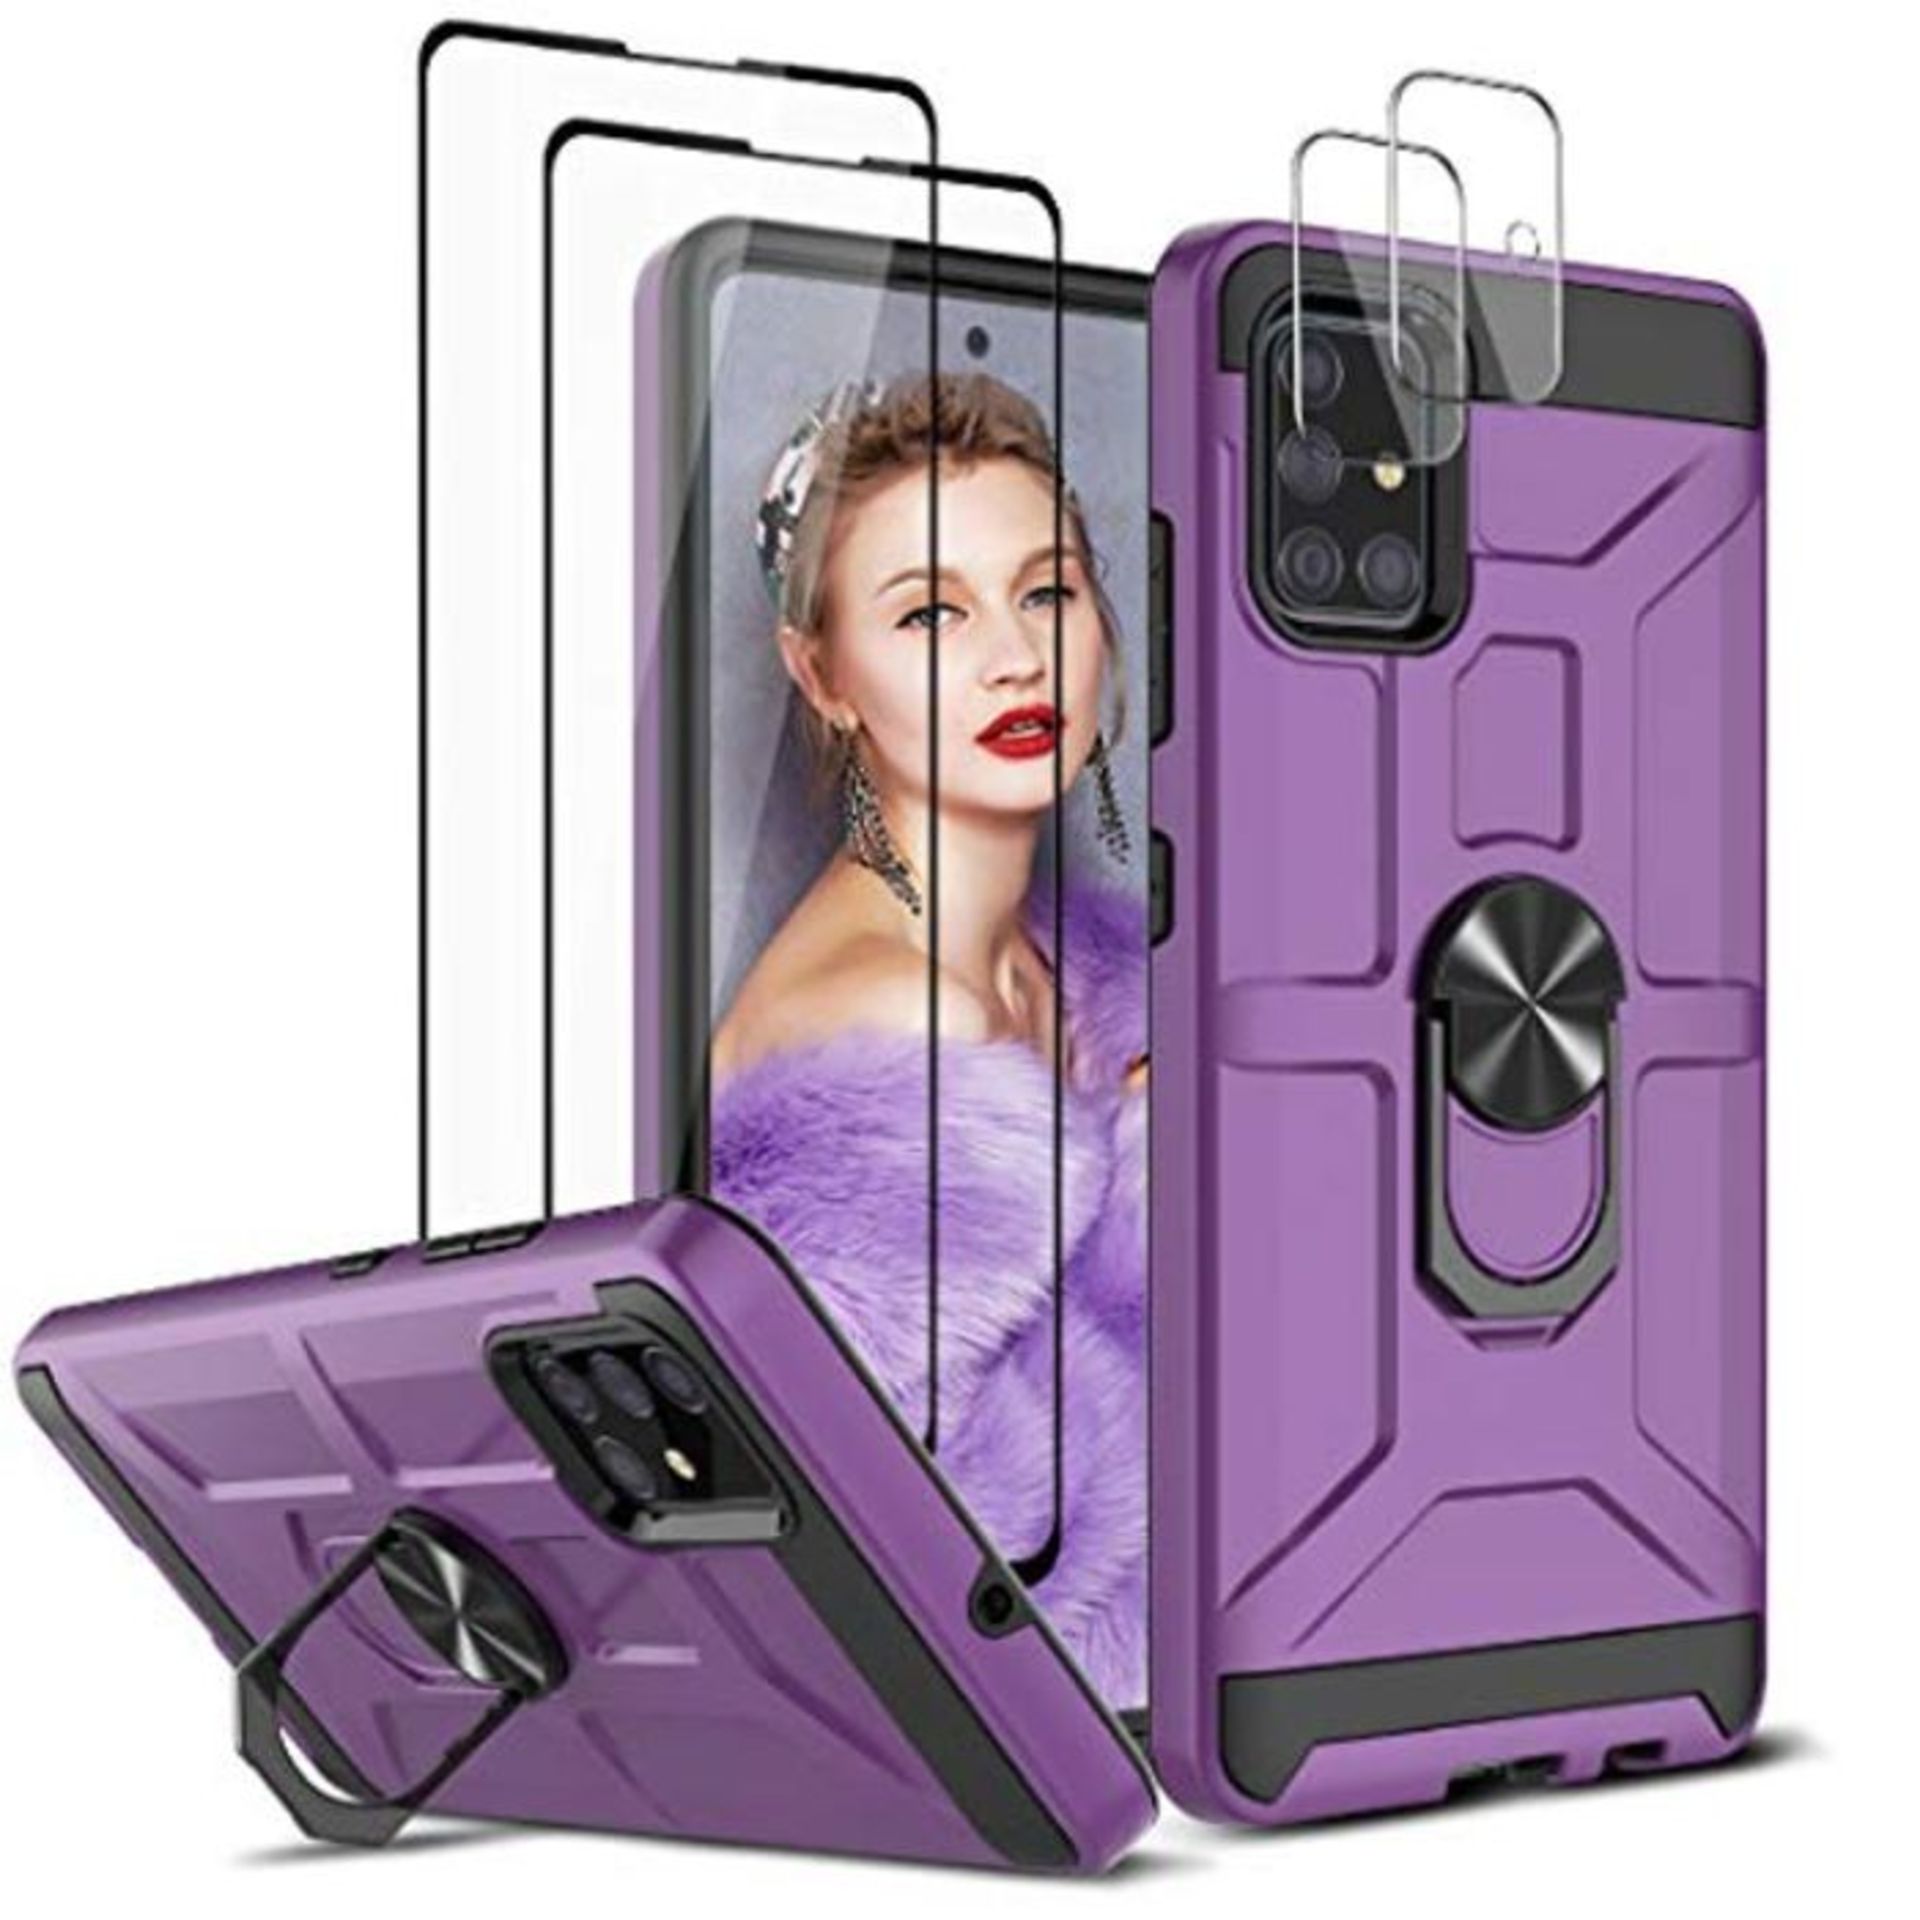 COMBINED RRP £1395.00 LOT TO CONTAIN 174 ASSORTED Tech Products: Amazon, OtterBox, Tec-Digi, Sc - Image 58 of 92